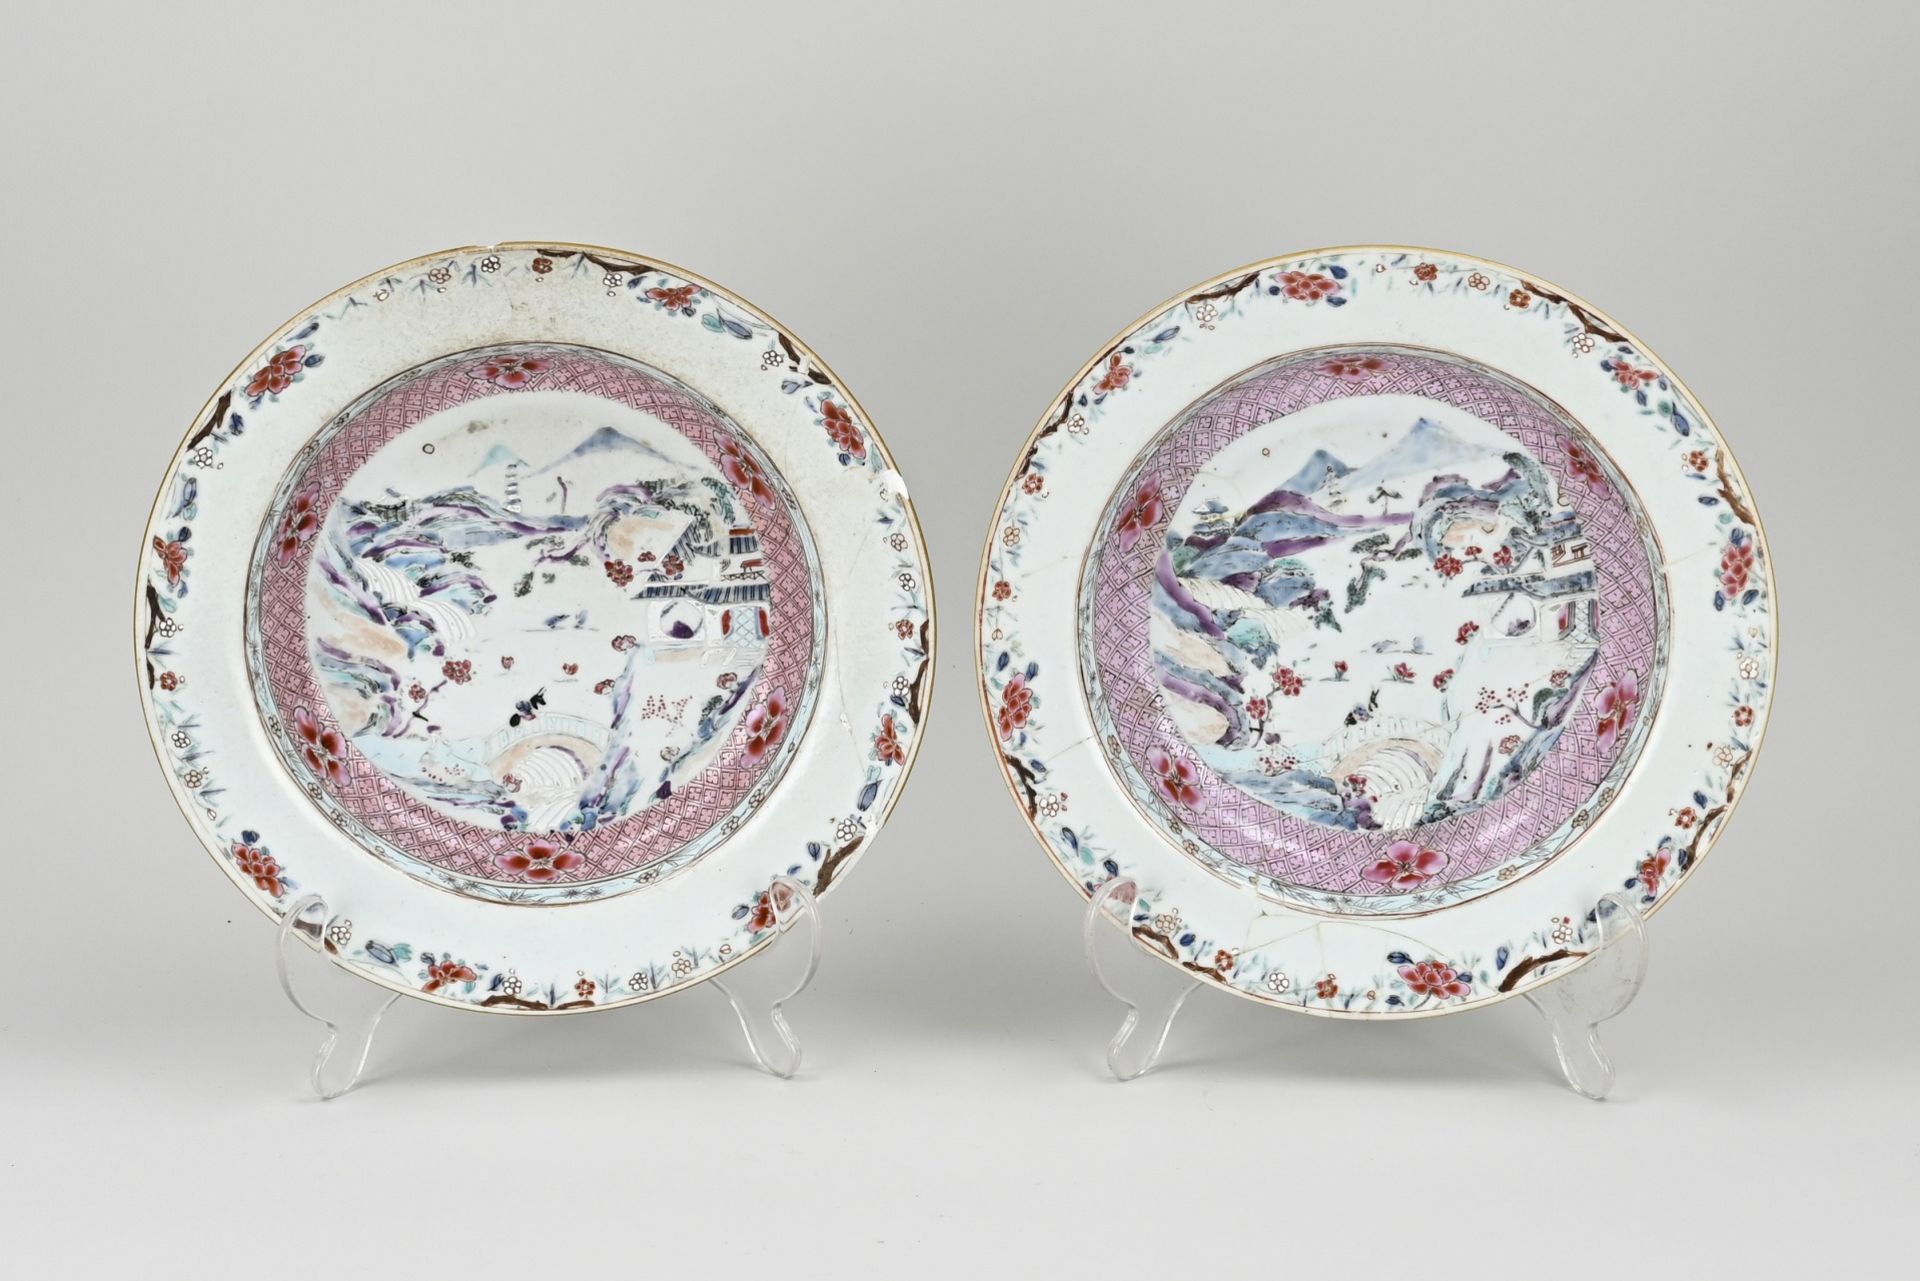 Two 18th century Chinese plates Ø 22.5 cm.